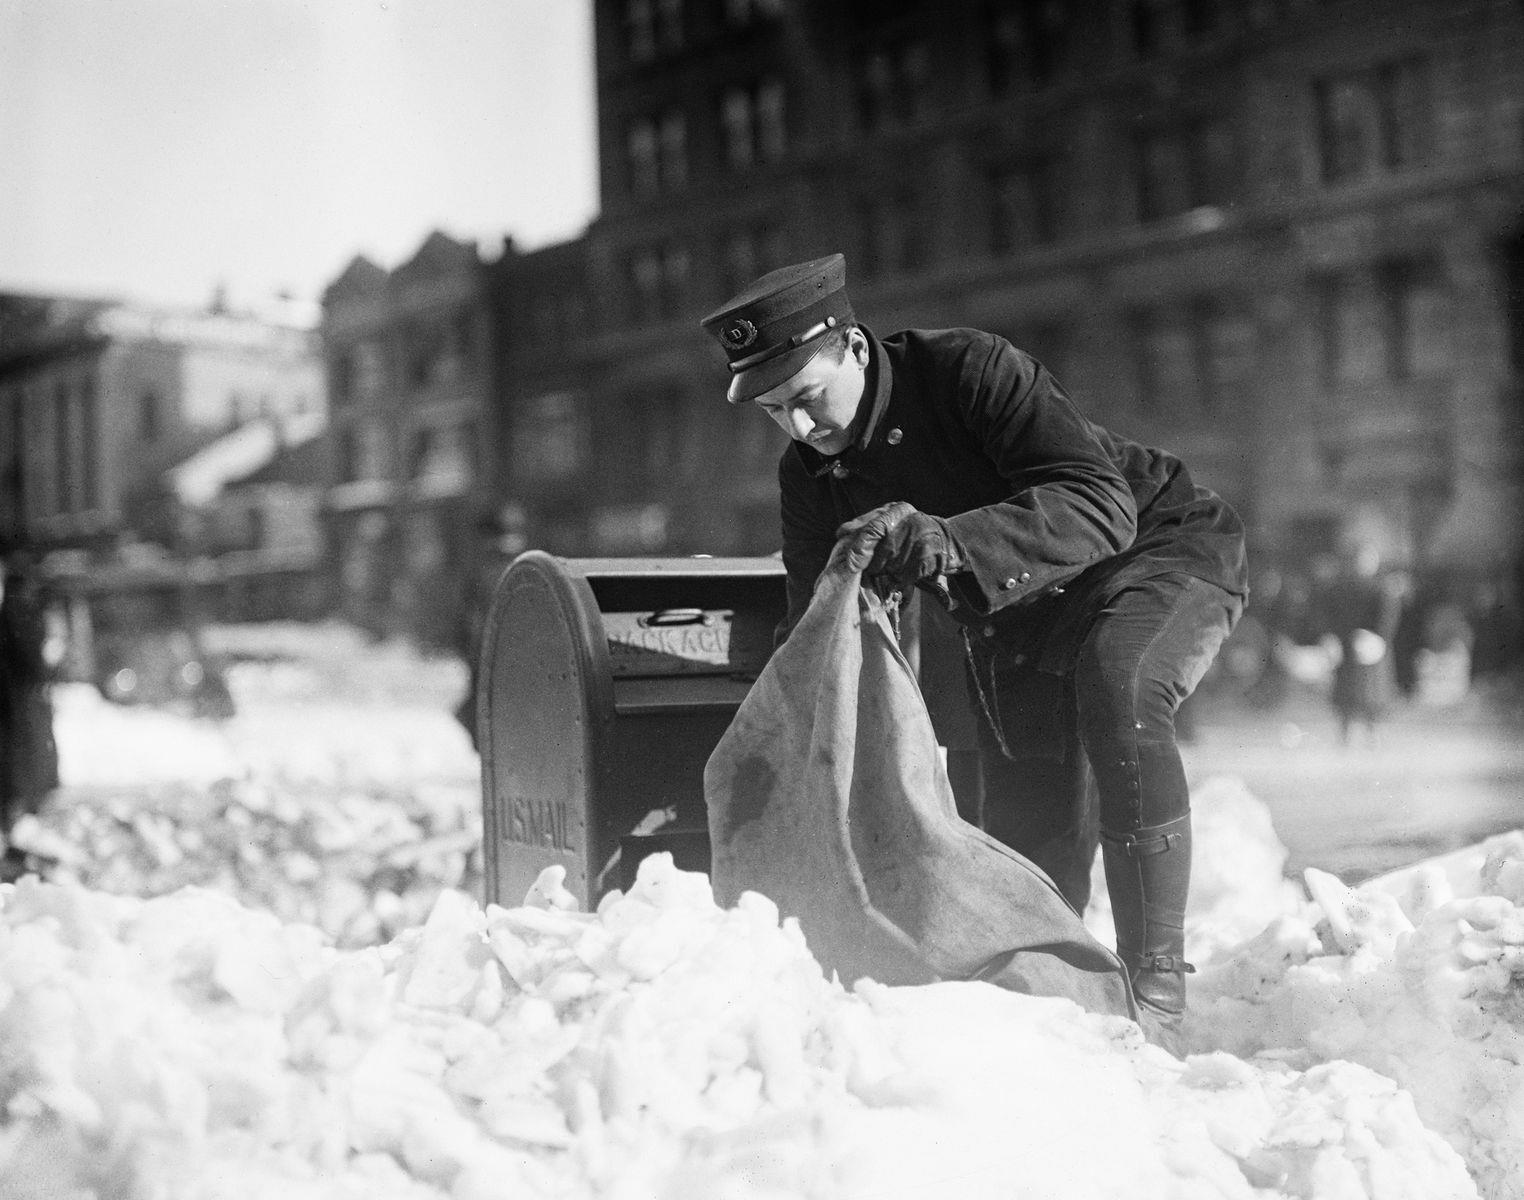 <p>In January 1922, Washington, DC, was hit by a <a href="https://www.neh.gov/divisions/preservation/featured-project/winter-takes-over-the-news-the-1922-%E2%80%9Cknickerbocker-storm%E2%80%9D-in-chronicling-america">historic snowstorm</a>. The storm was not forecast, and residents were caught off-guard. According to local media, up to 60 centimetres (24 inches) of snow fell in 24 hours on the nation’s capital, breaking records as the “largest amount of snow ever for a 24-hour period.”</p>